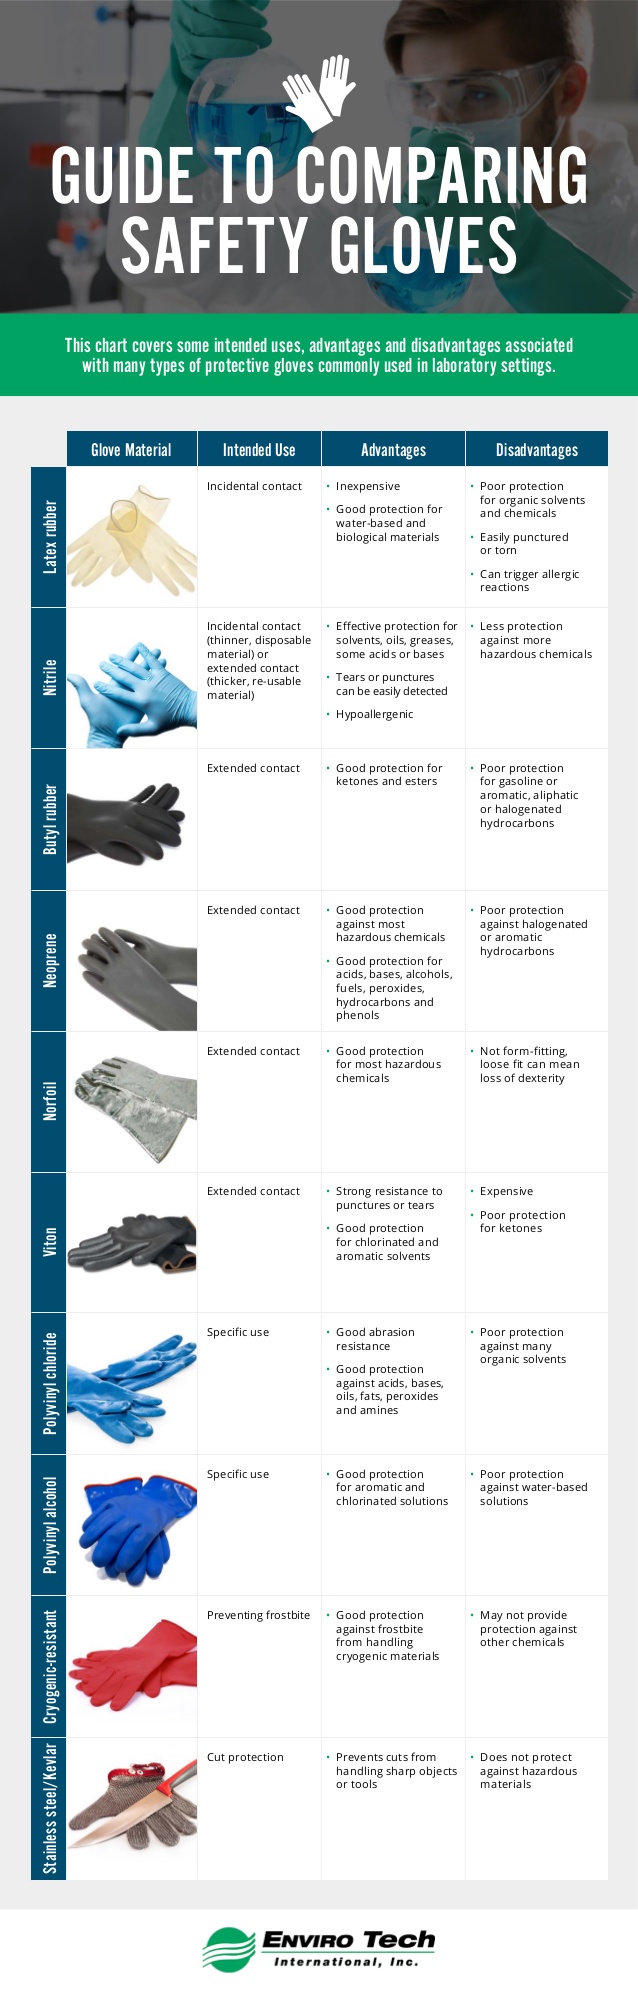 Cut Protection Glove Guide